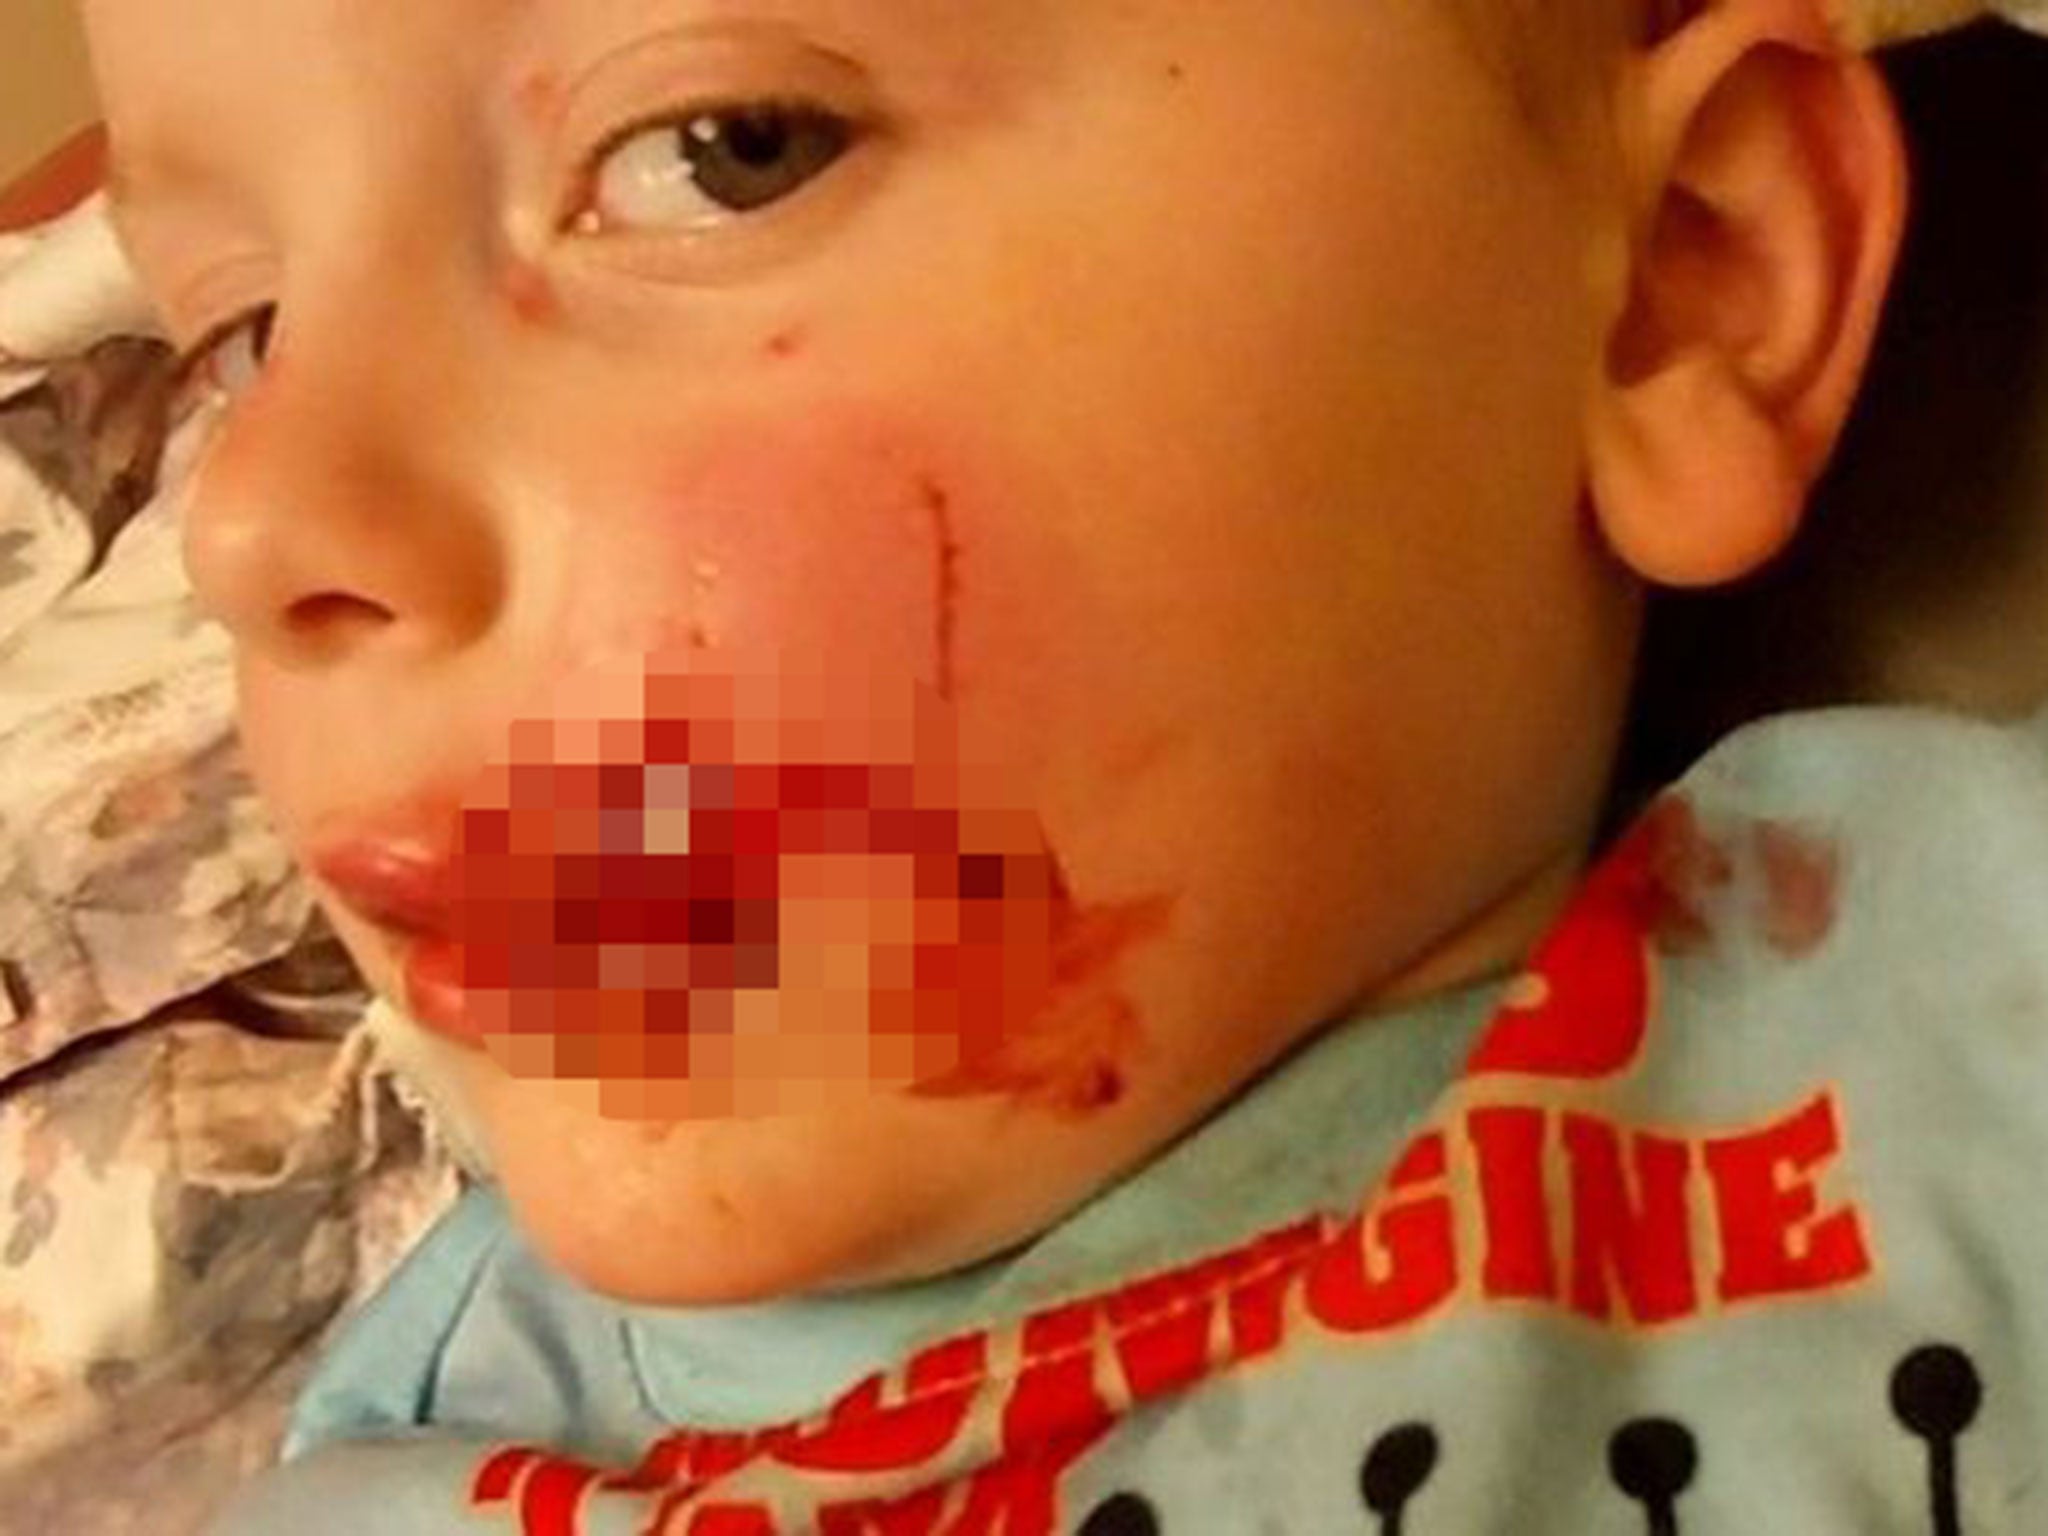 The boy's family released the pictures to warn others of the danger of dog attacks and help police track down the animal